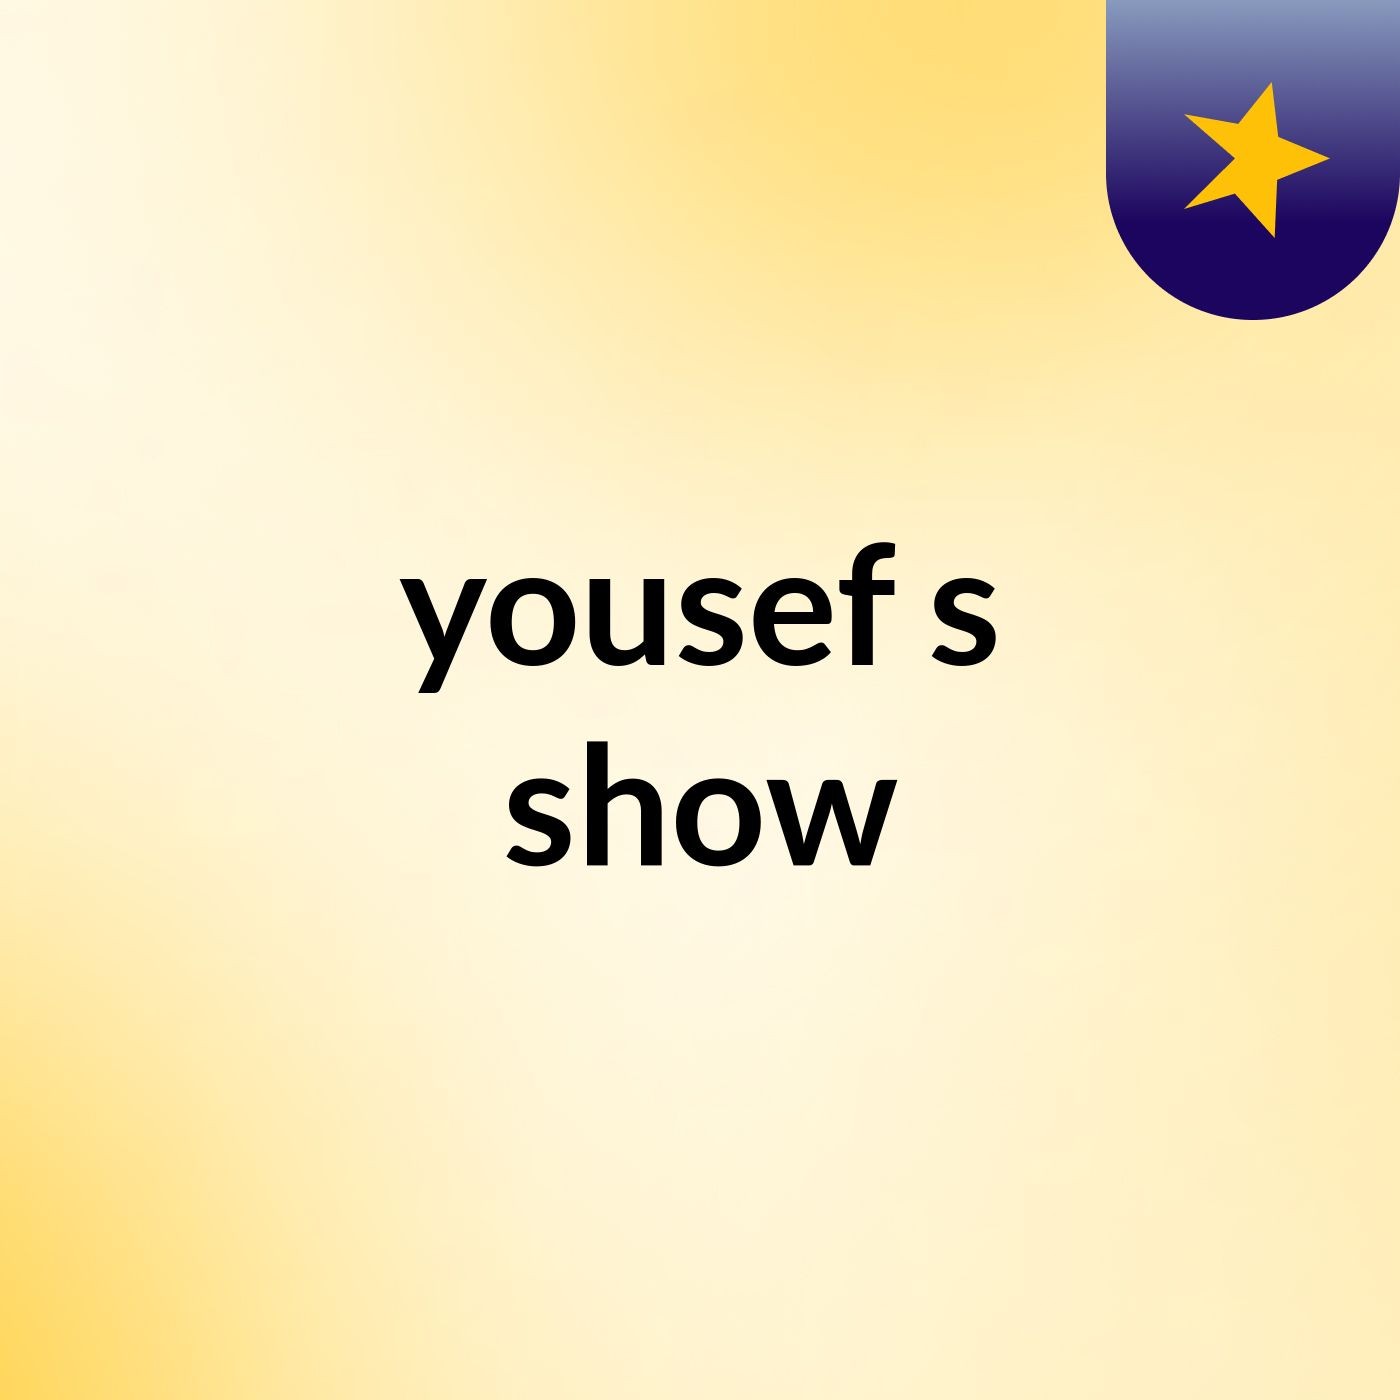 yousef's show